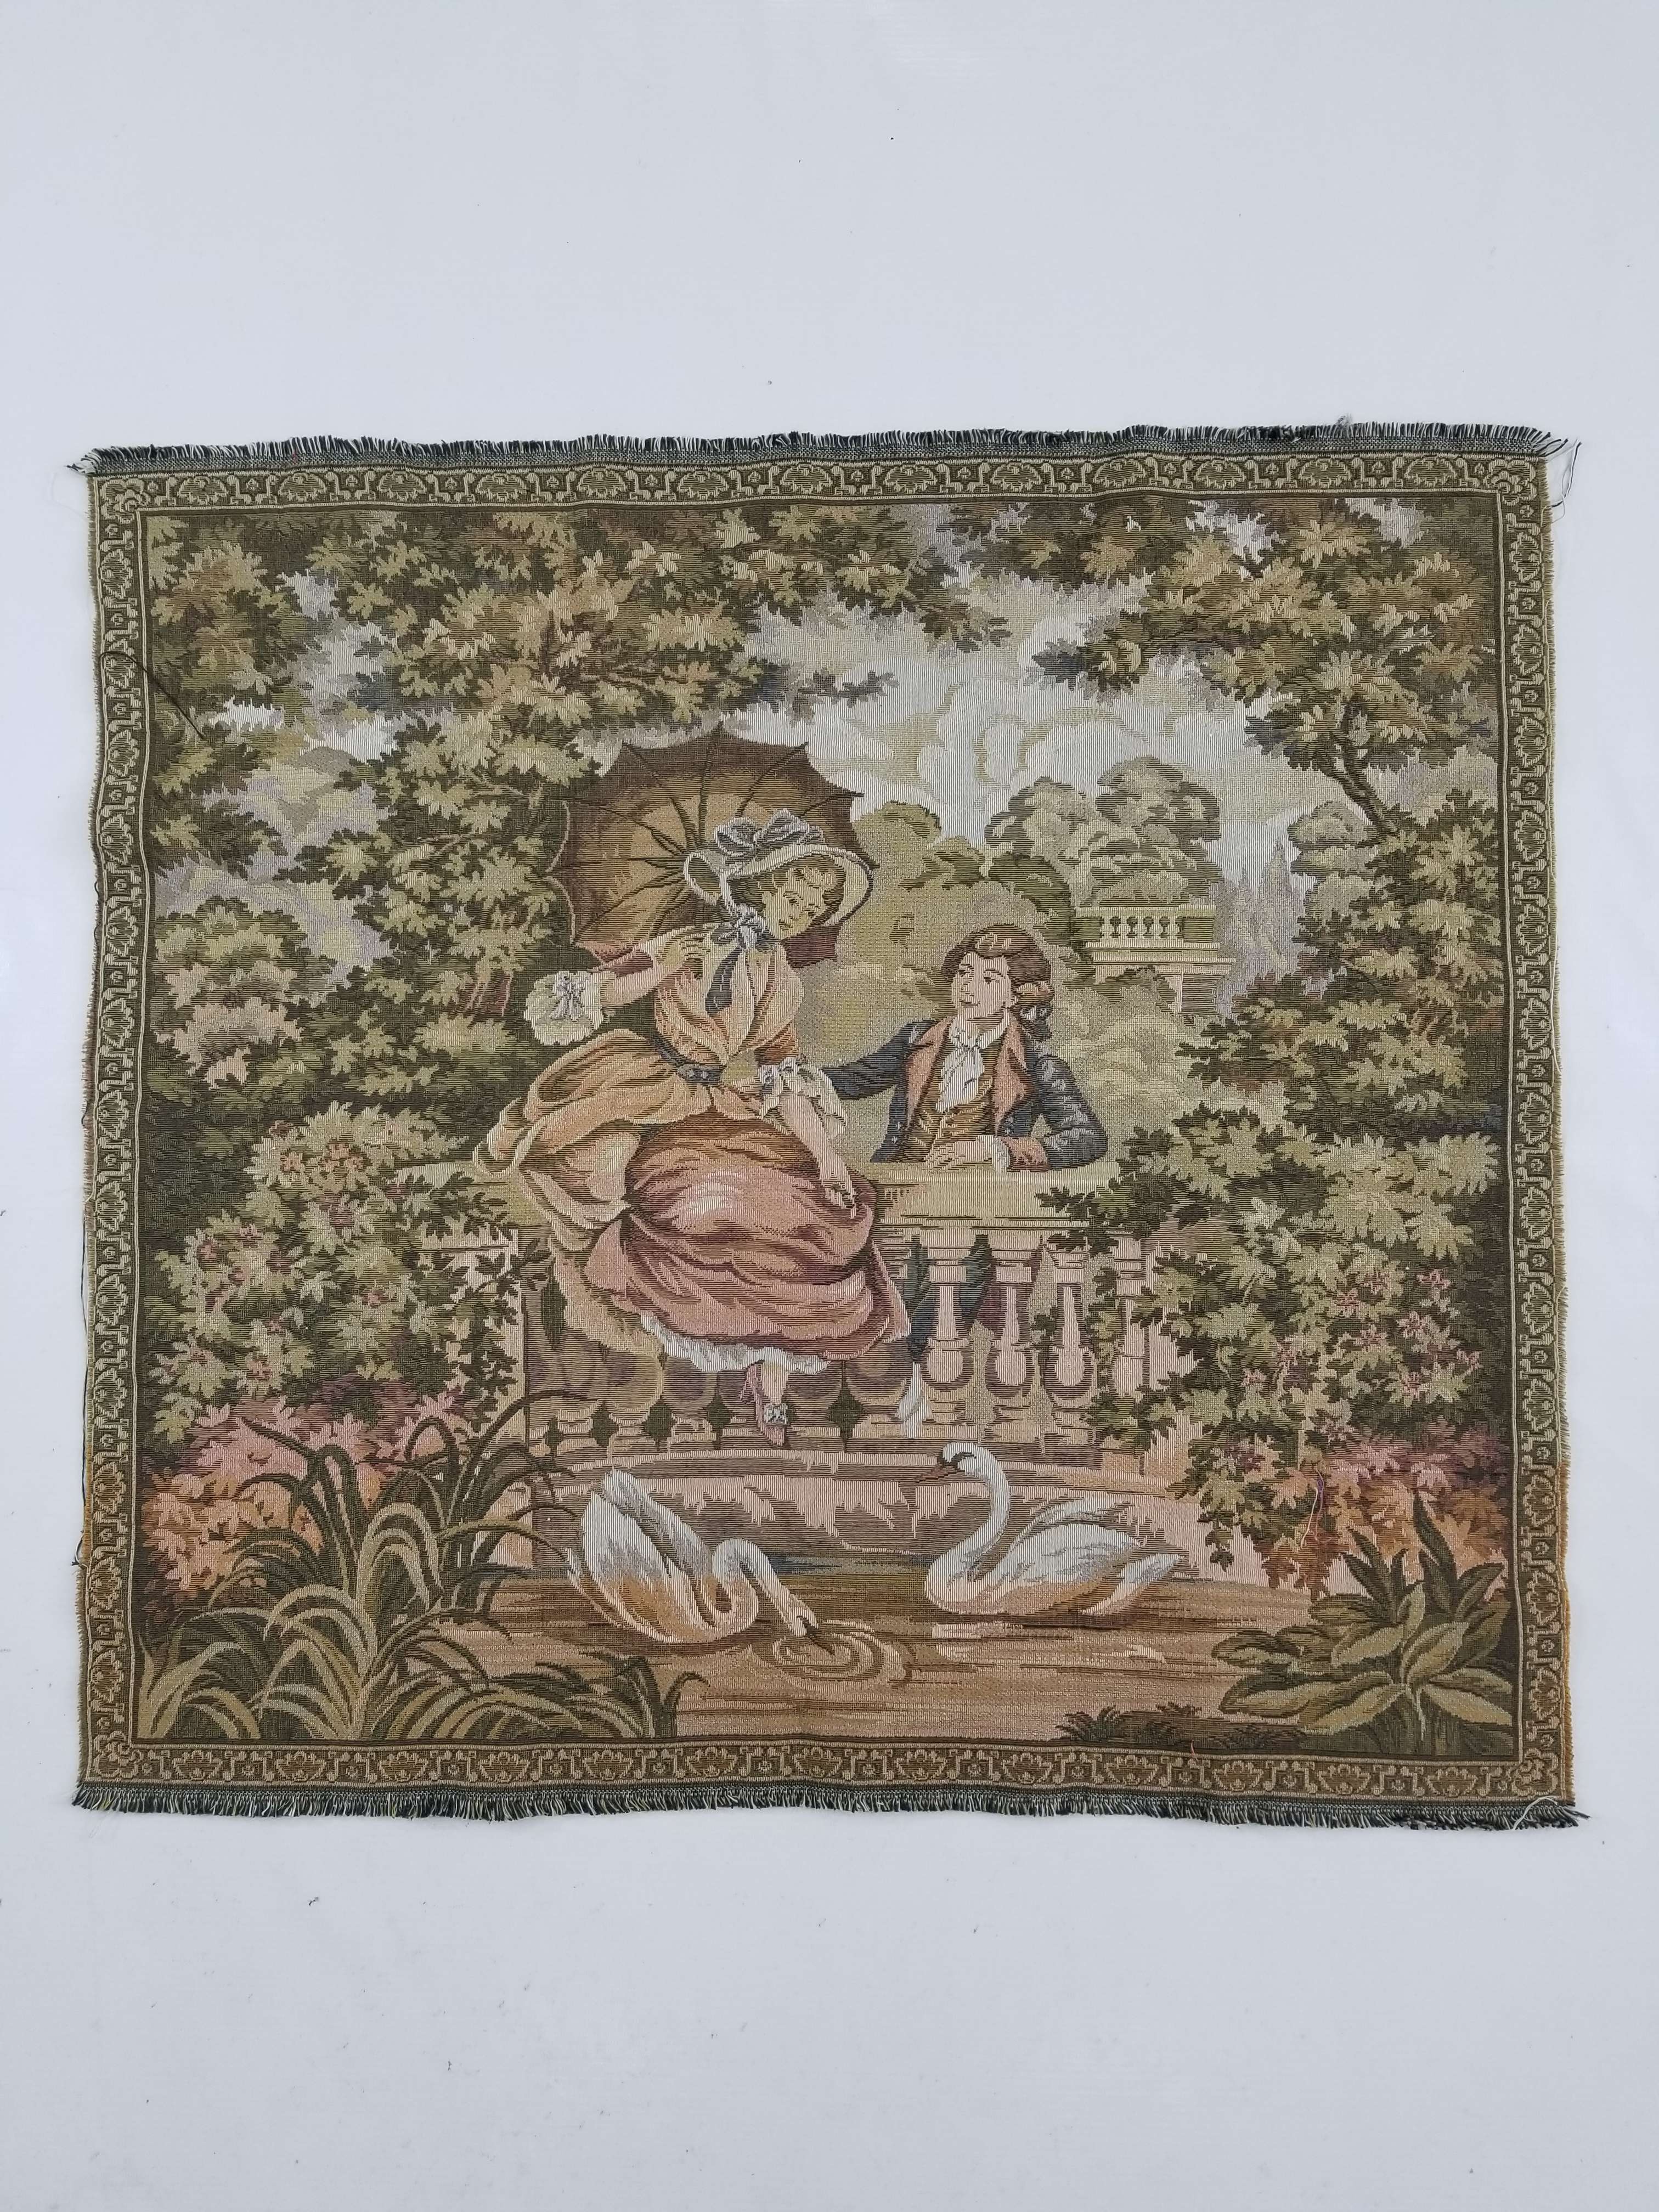 Vintage French Couple Romantic Scene Wall Hanging Tapestry 74x70cm